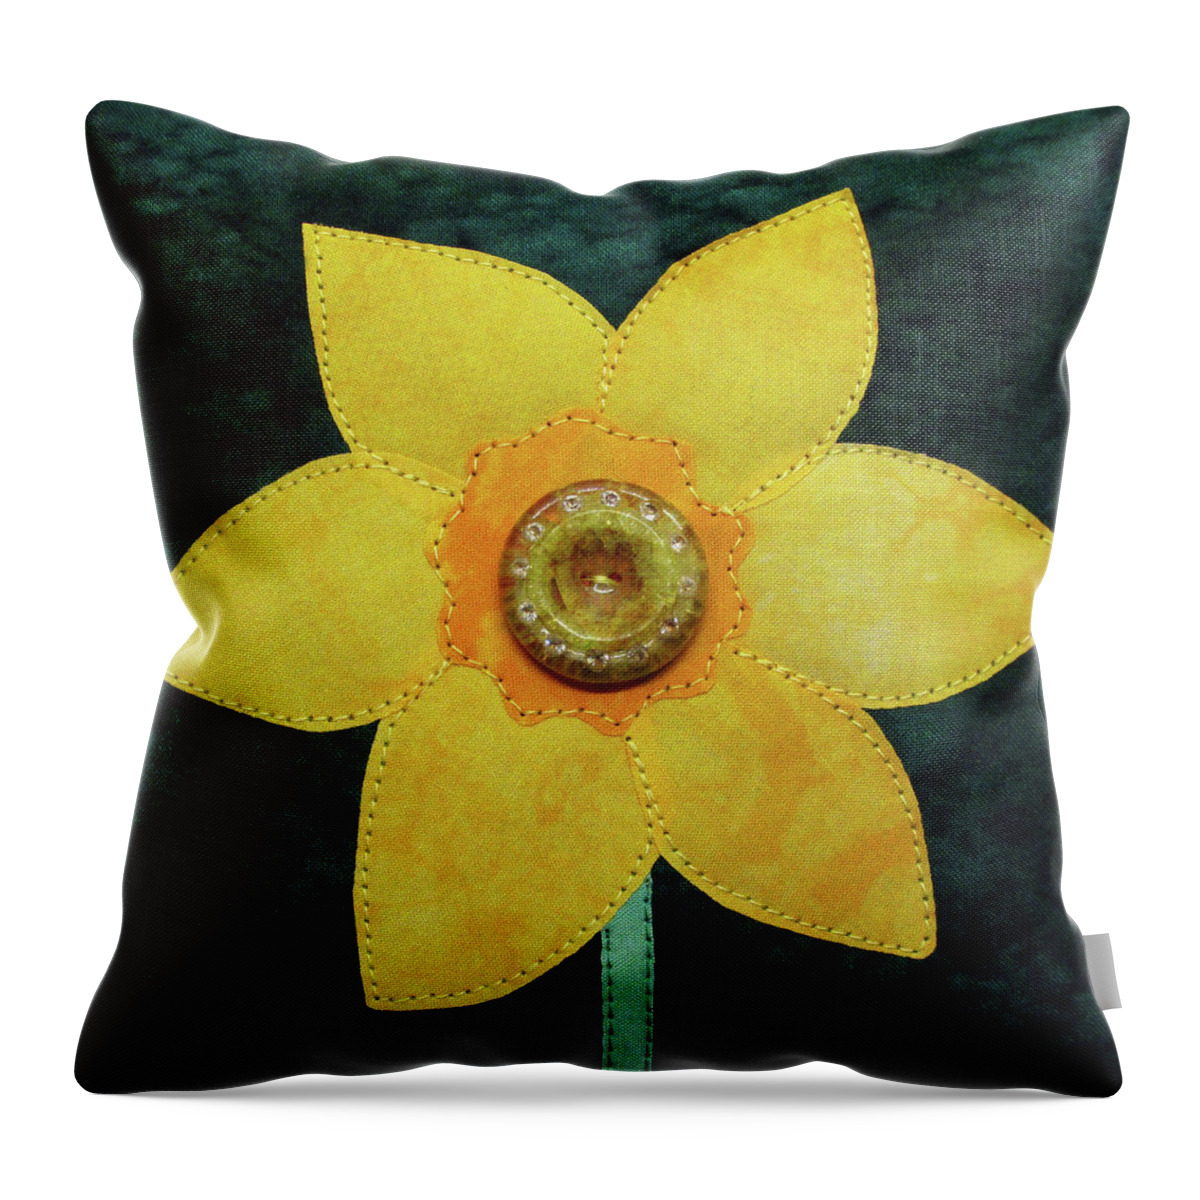 Daffodil Throw Pillow featuring the tapestry - textile Daffy O'Dilly by Pam Geisel